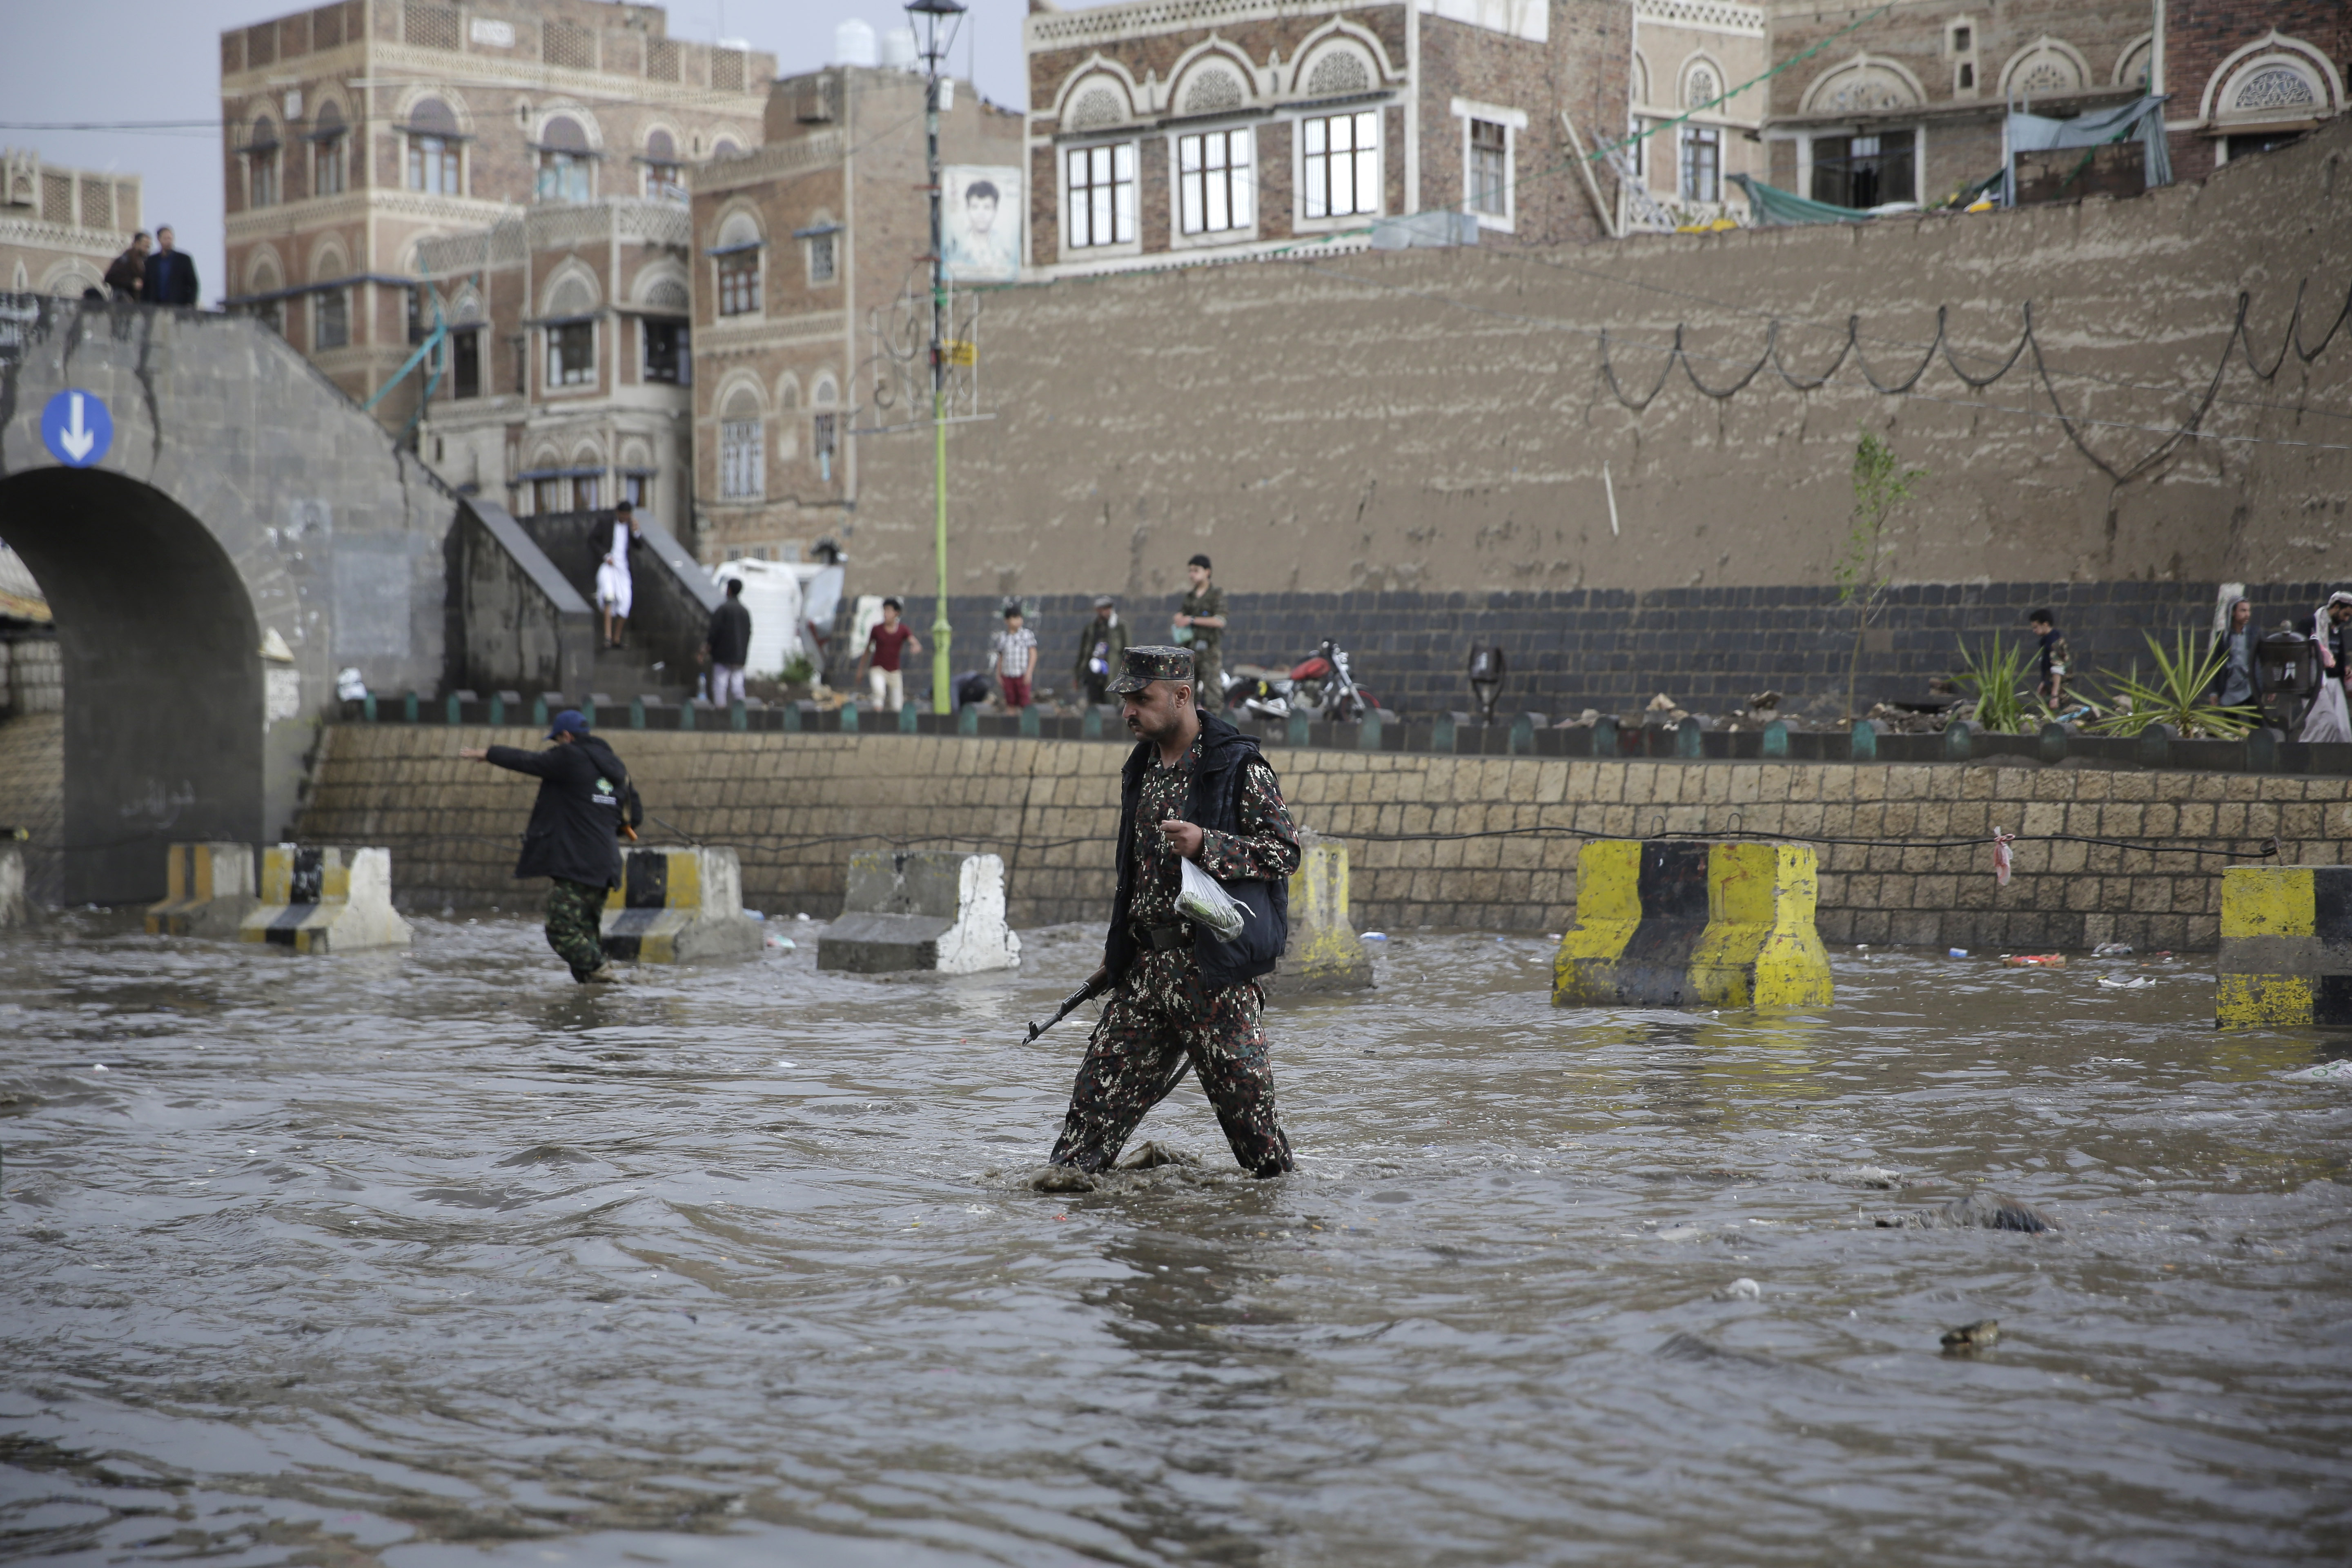 A Houthi militant cross a flooded street as he guards a street leading to a protest against the U.S. airstrike in Iraq that killed of Iraqi militia commander Abu Mahdi al-Muhandis and Iranian military commander Qassem Soleimani, in Sanaa, Yemen, Monday, Jan. 6, 2020. (AP Photo/Hani Mohammed)